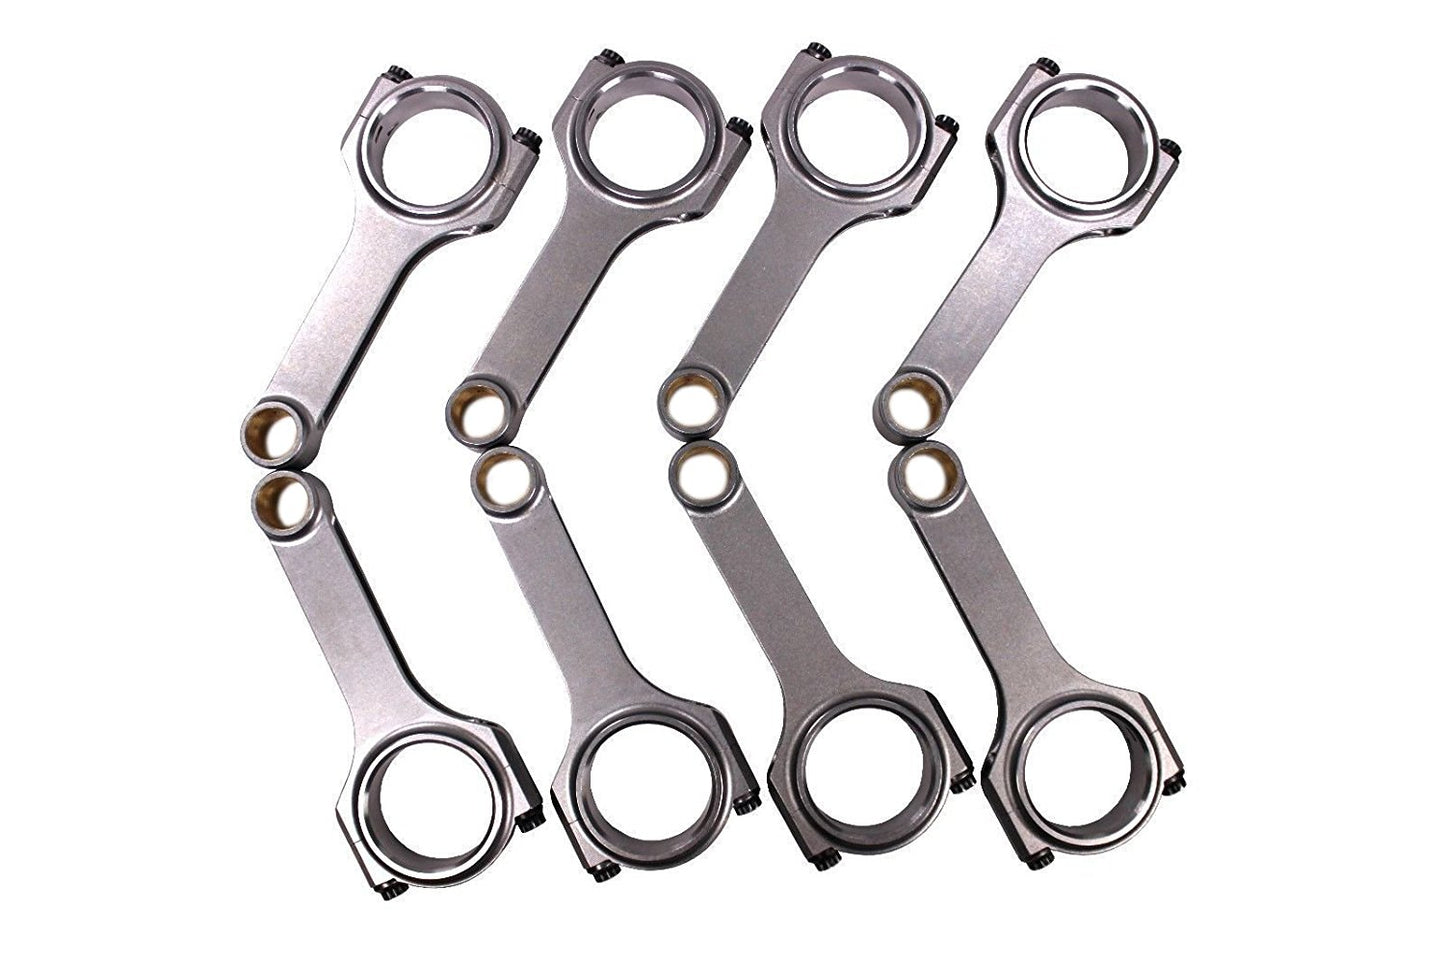 Set of 8 H Beam 6.135" 2.200" .990" Bronze Bush 4340 Connecting Rods Suits(with bolts): Chevy BBC 454